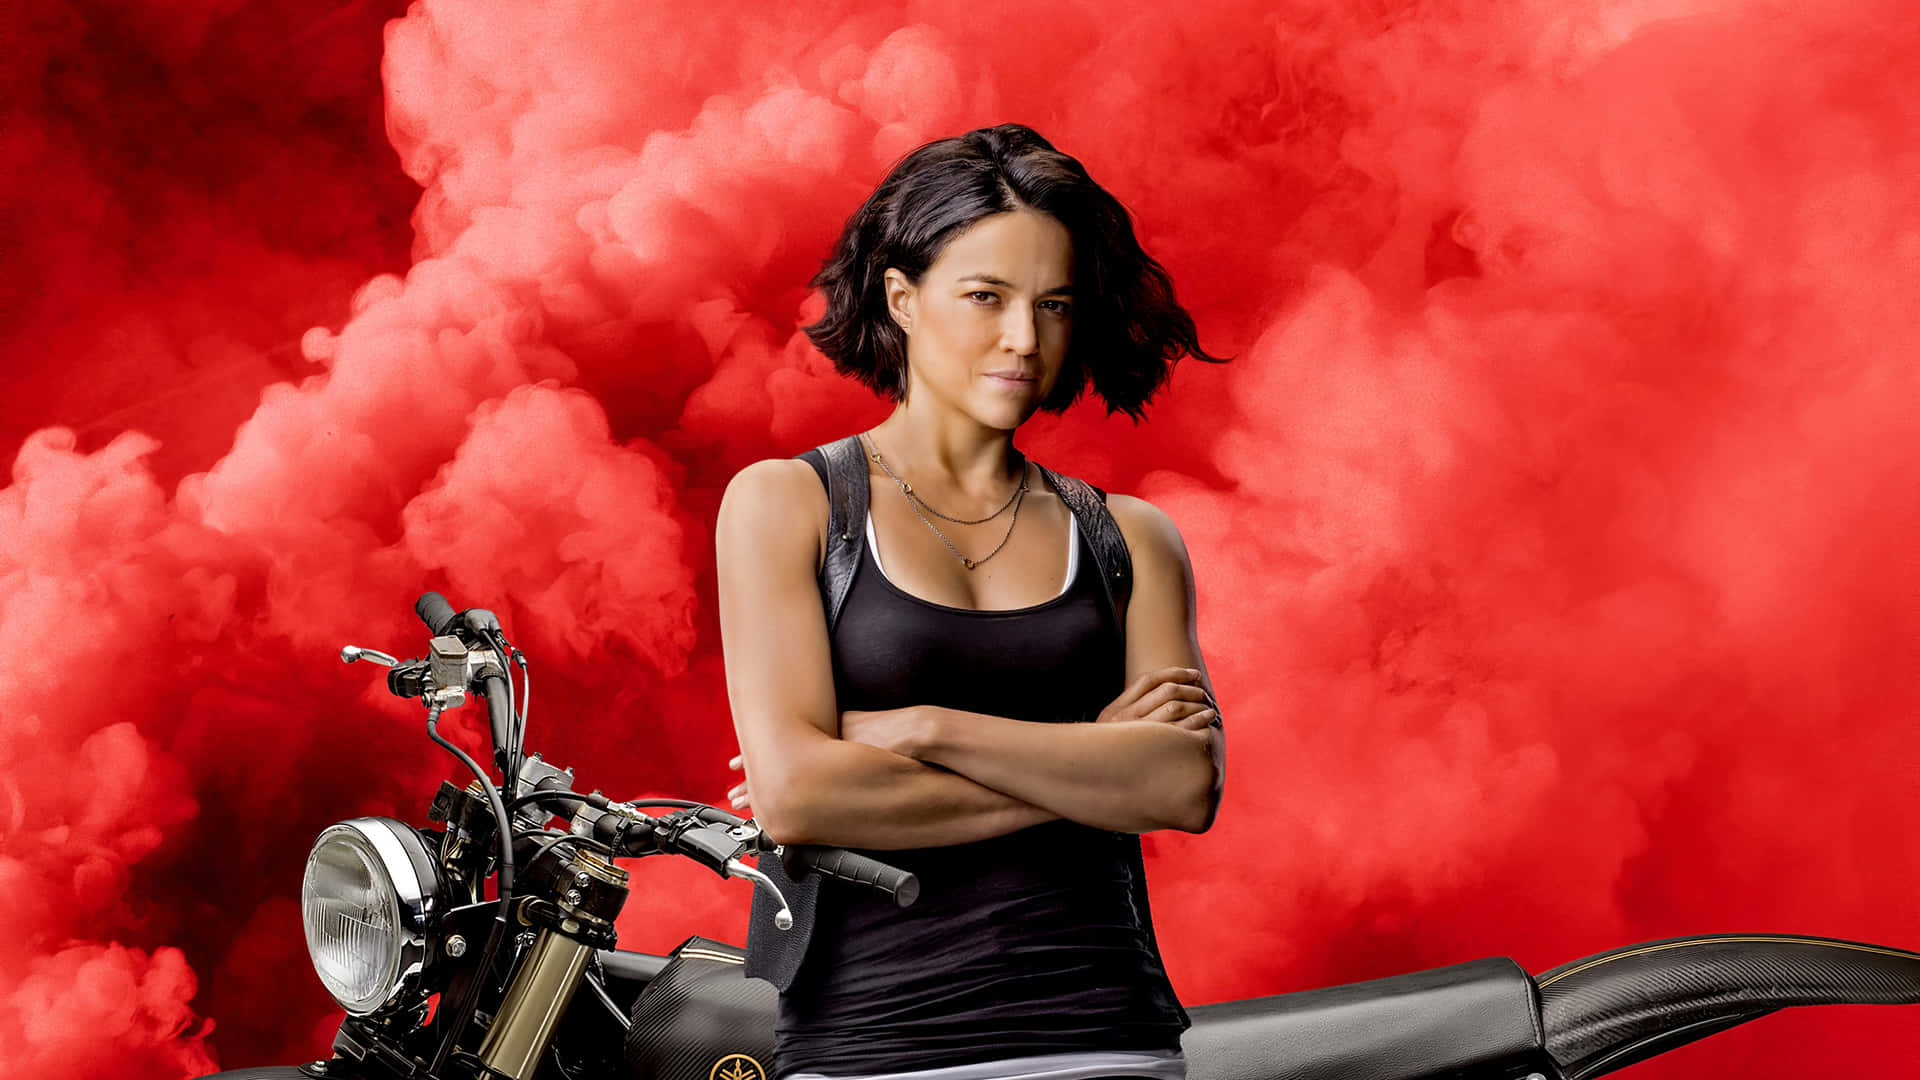 A Woman Standing On A Motorcycle With Smoke Coming Out Of It Wallpaper